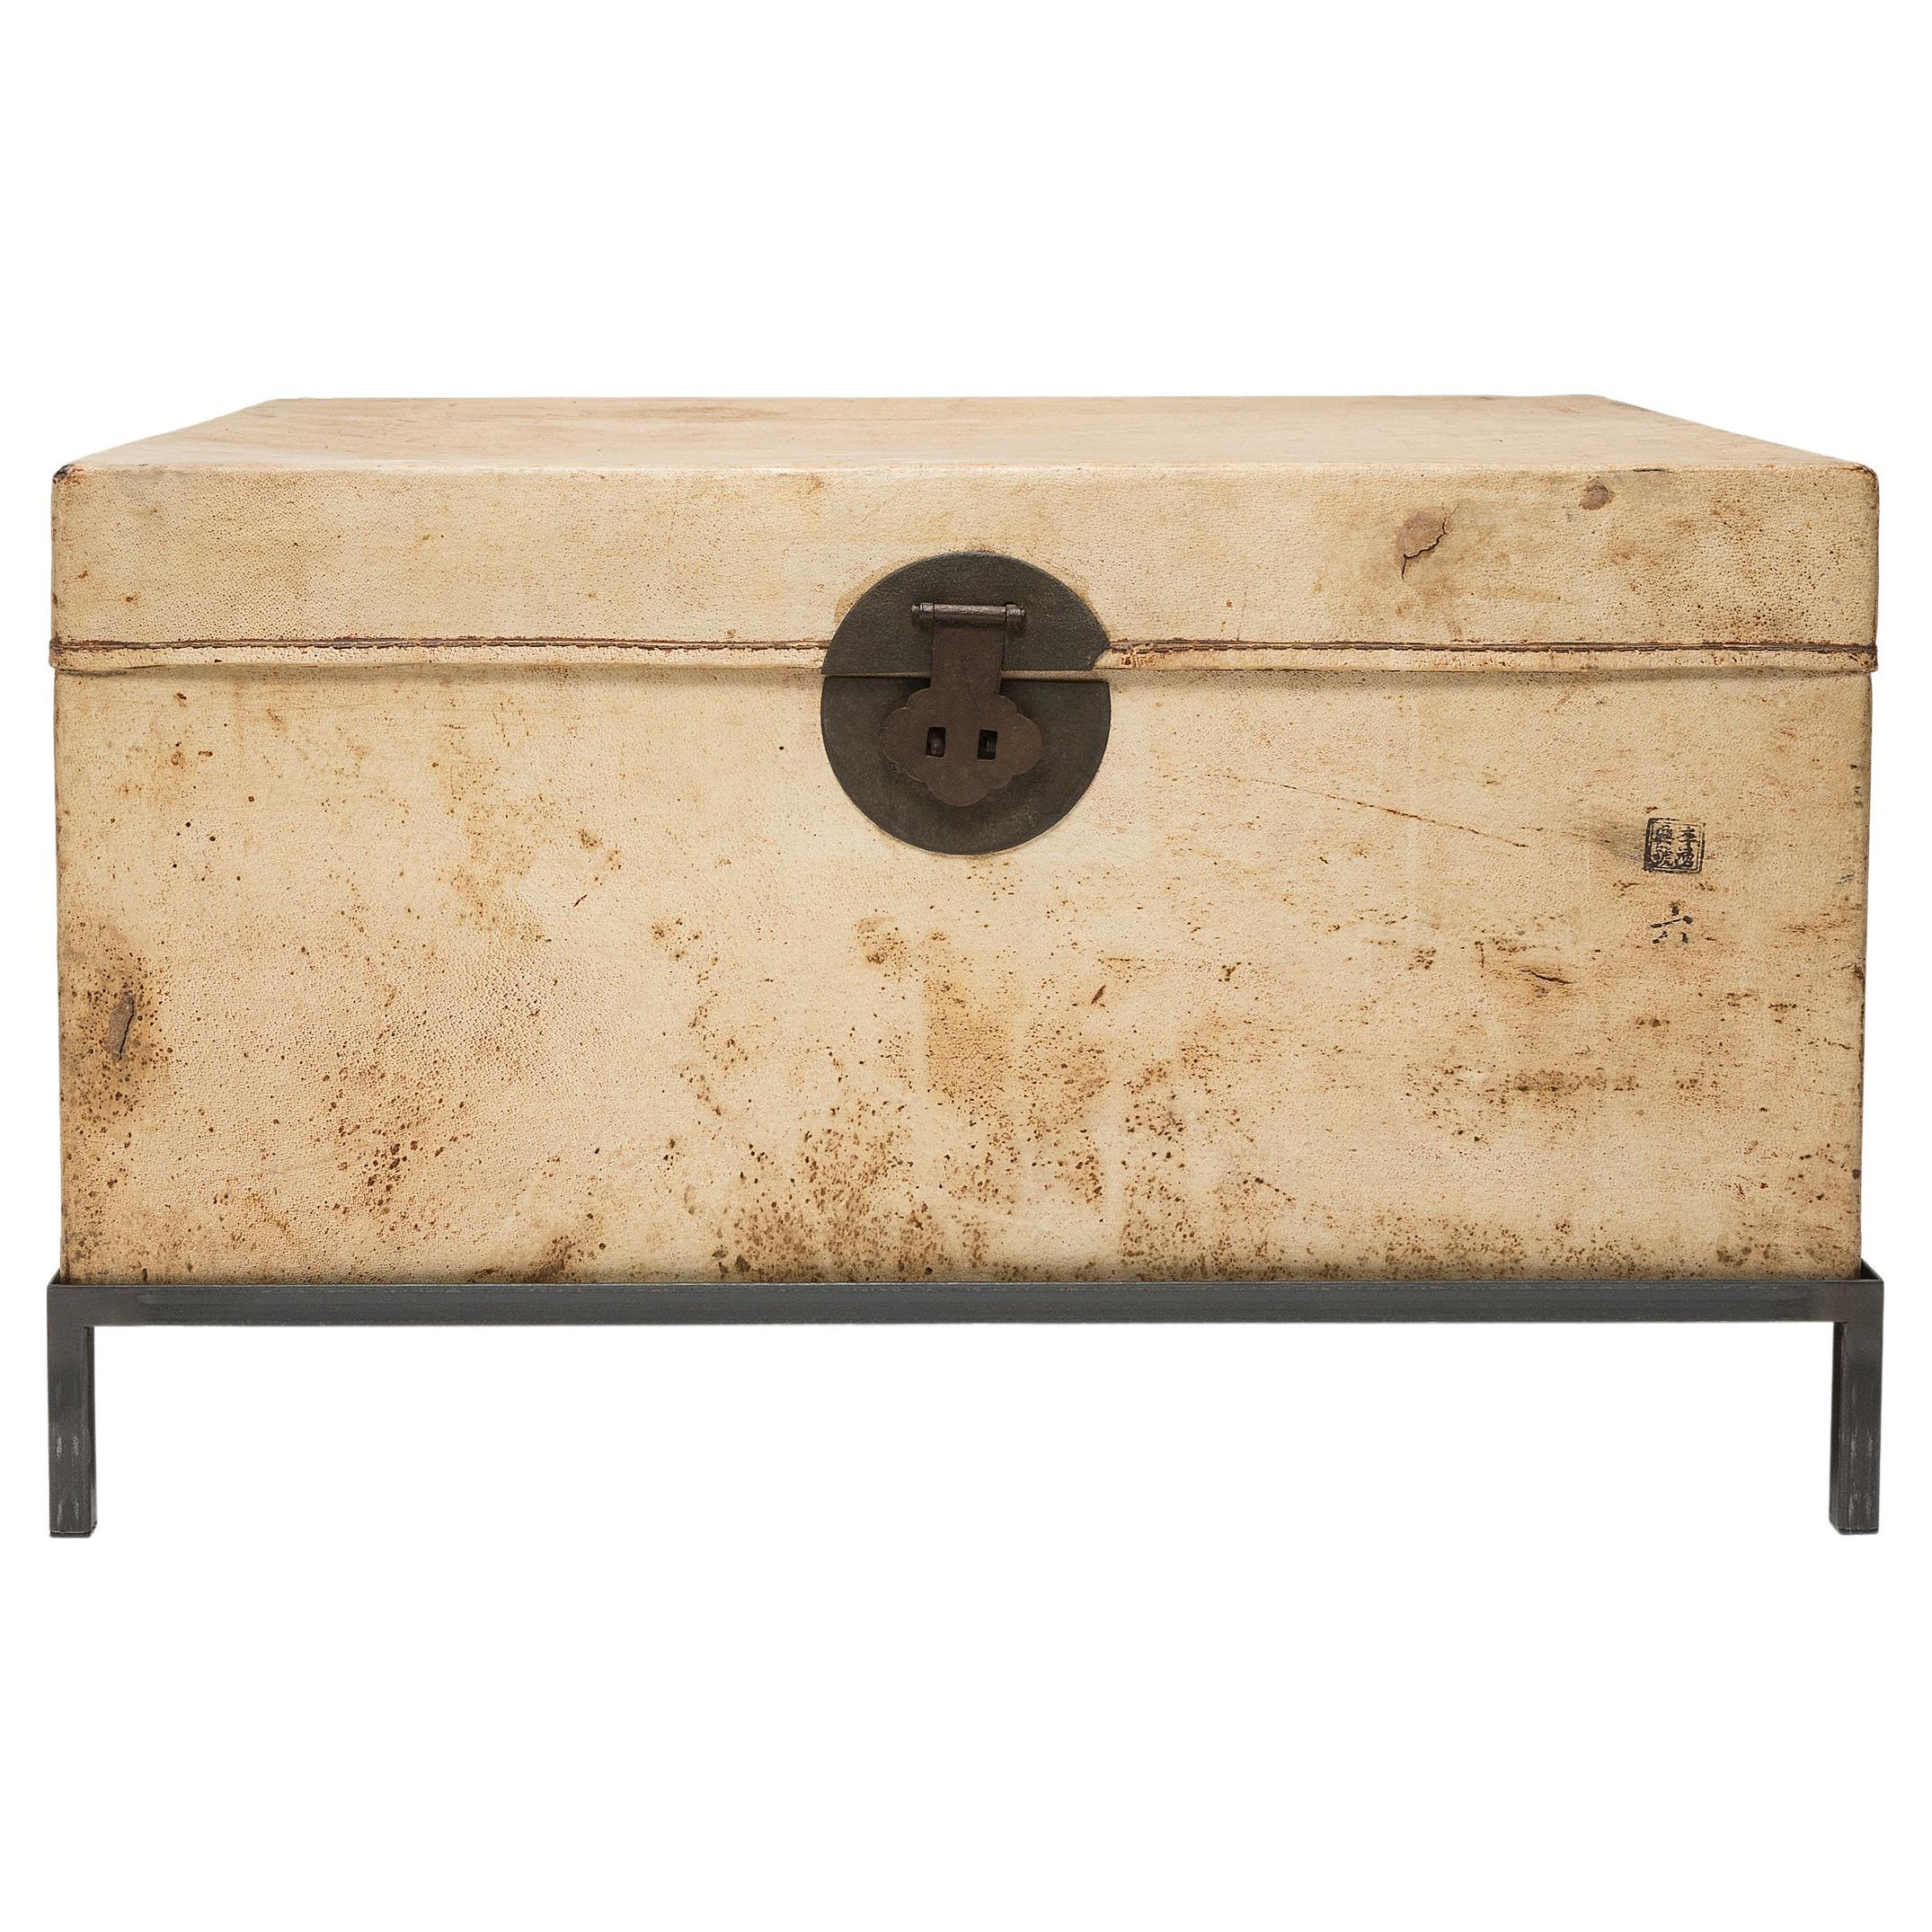 Blonde Chinese Hide Trunk Table, C. 1800